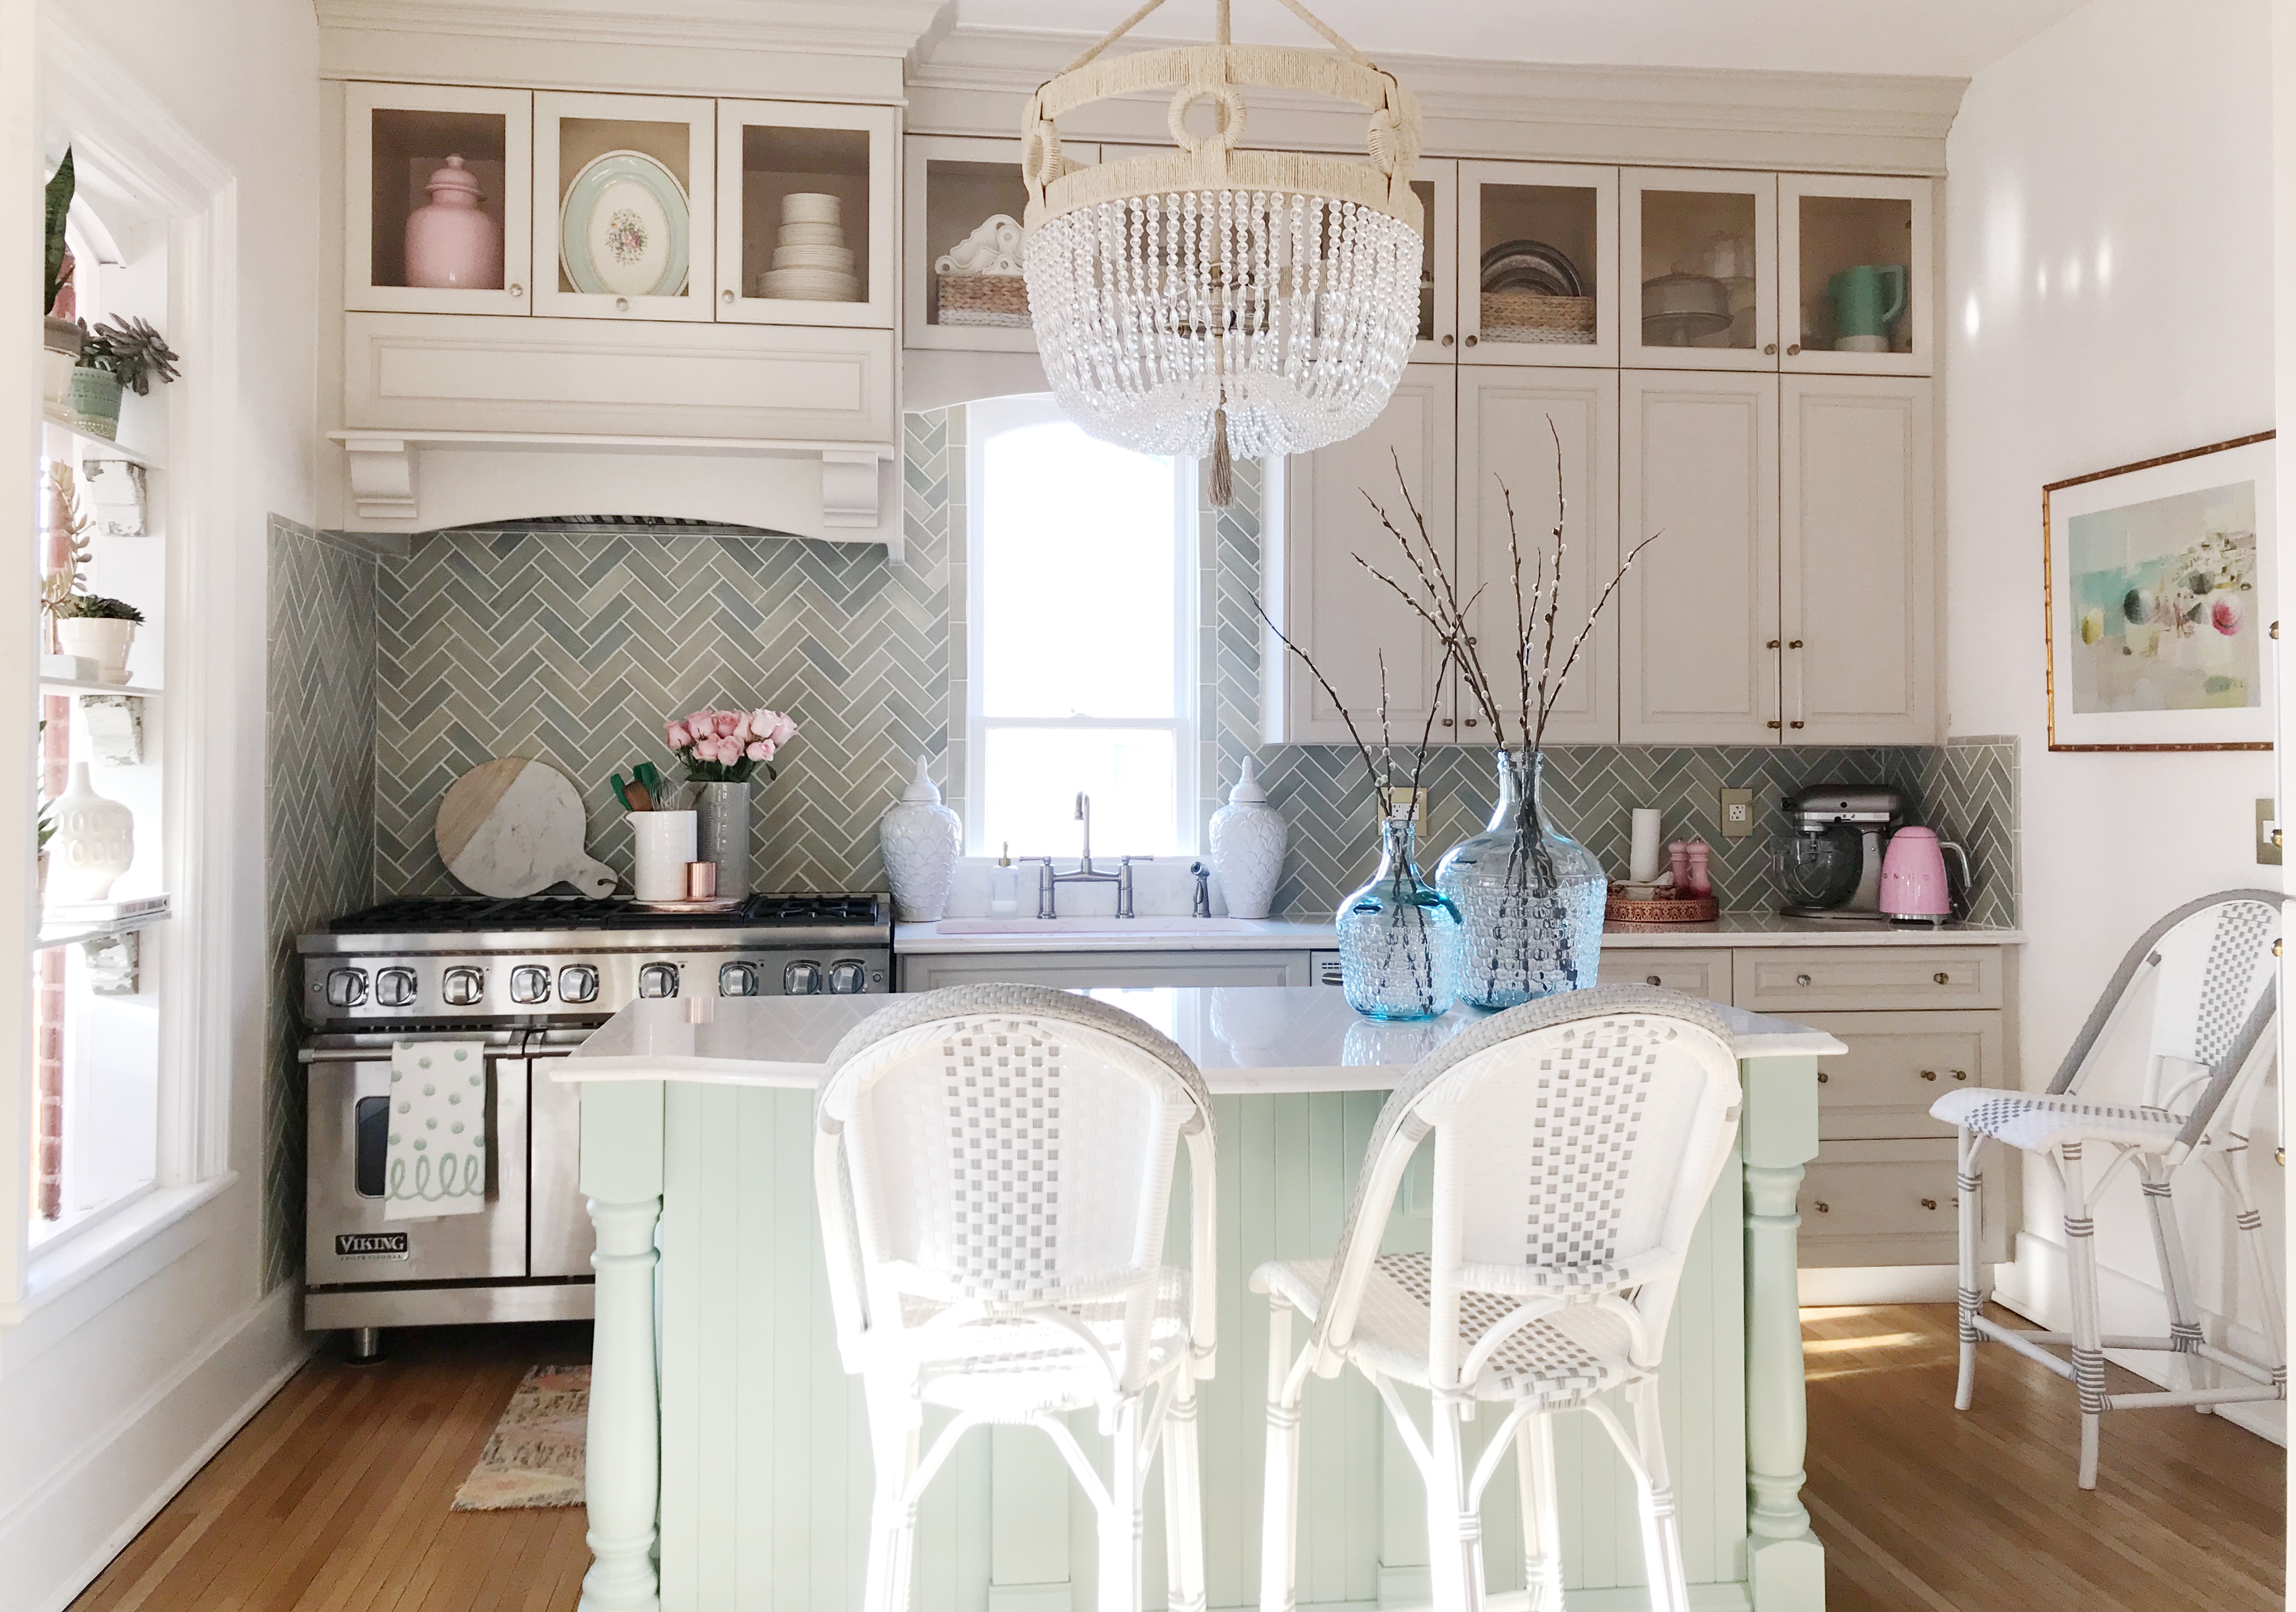 How to Add Decor Accessories to Your Kitchen - The Leslie Style